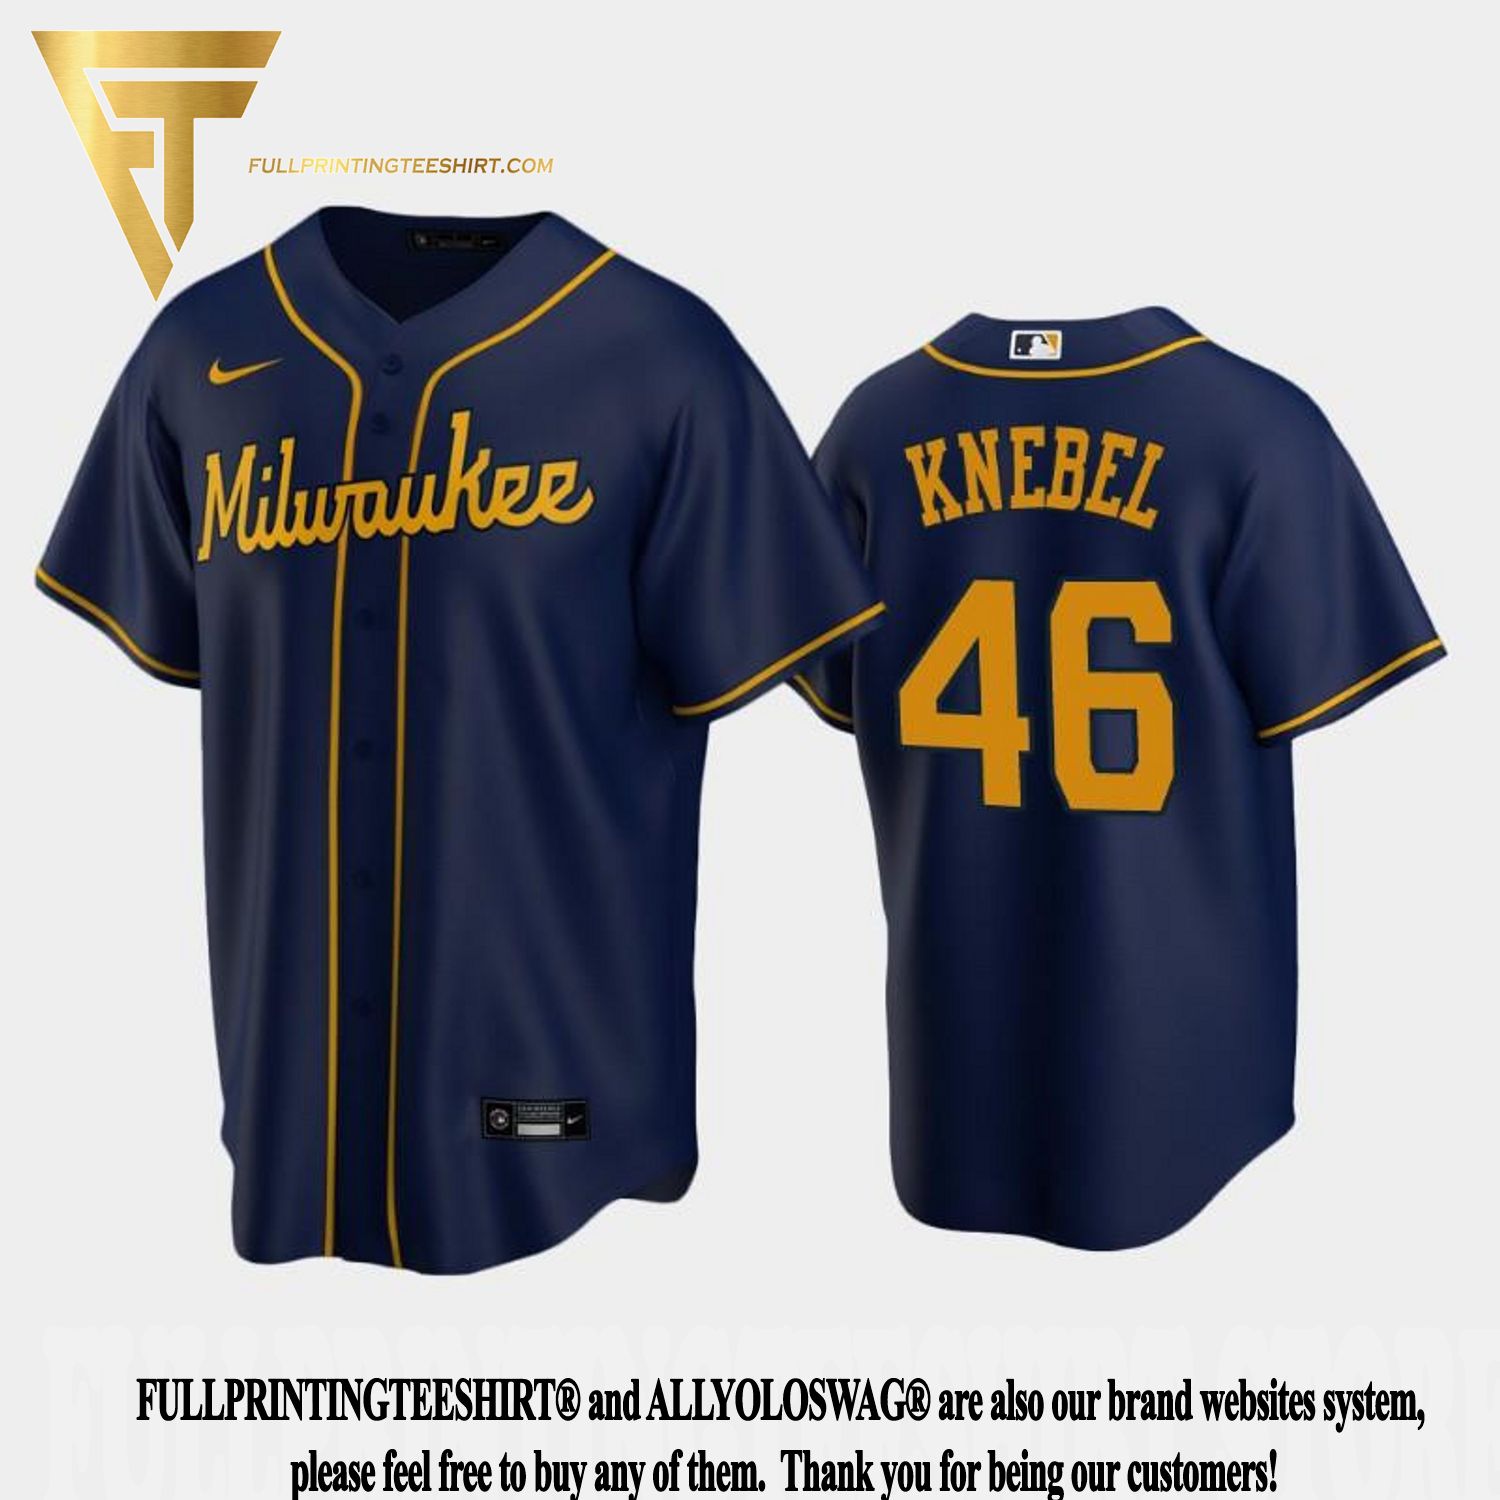 Top-selling Item] Brewers 46 Corey Knebel Road Gray 3D Unisex Jersey